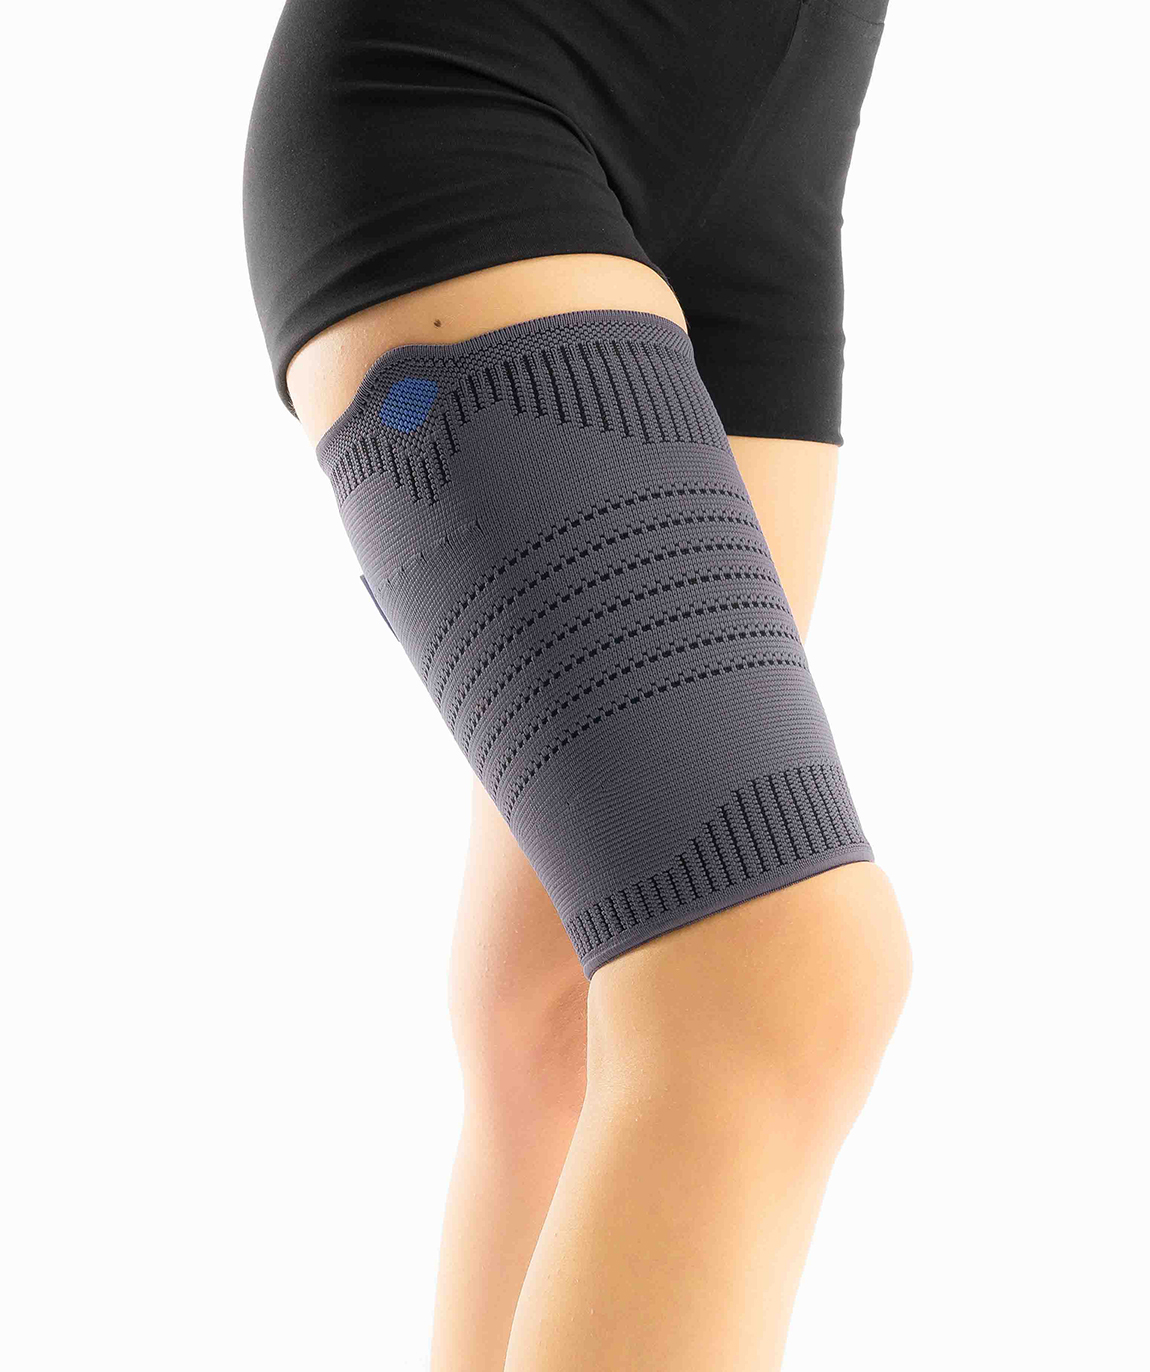 Thigh Support Knitted Fabric, Knee - Leg Supports